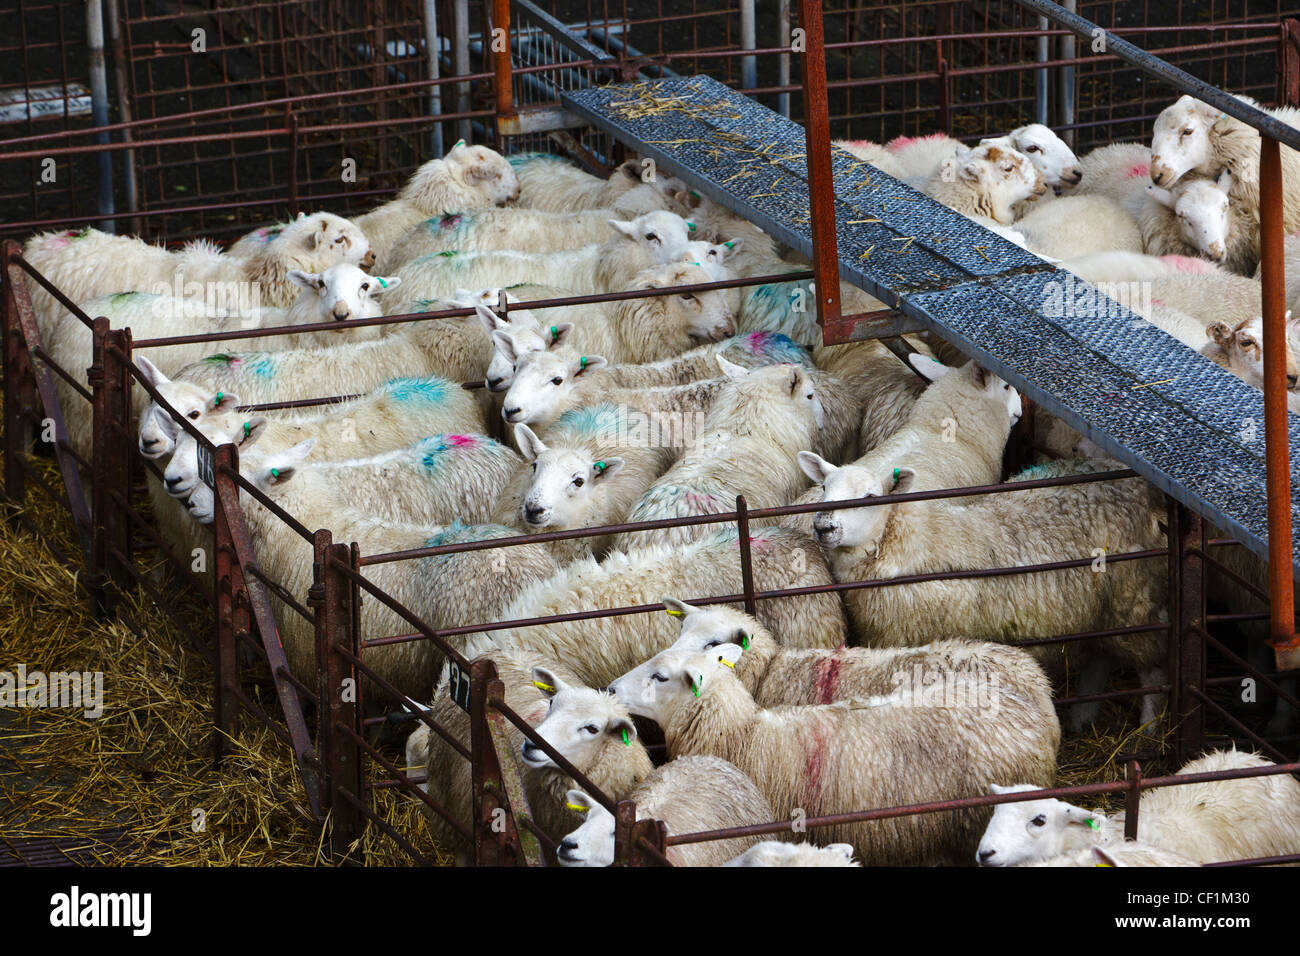 Sheep in pens at Dolgellau Livestock Auction. Stock Photo